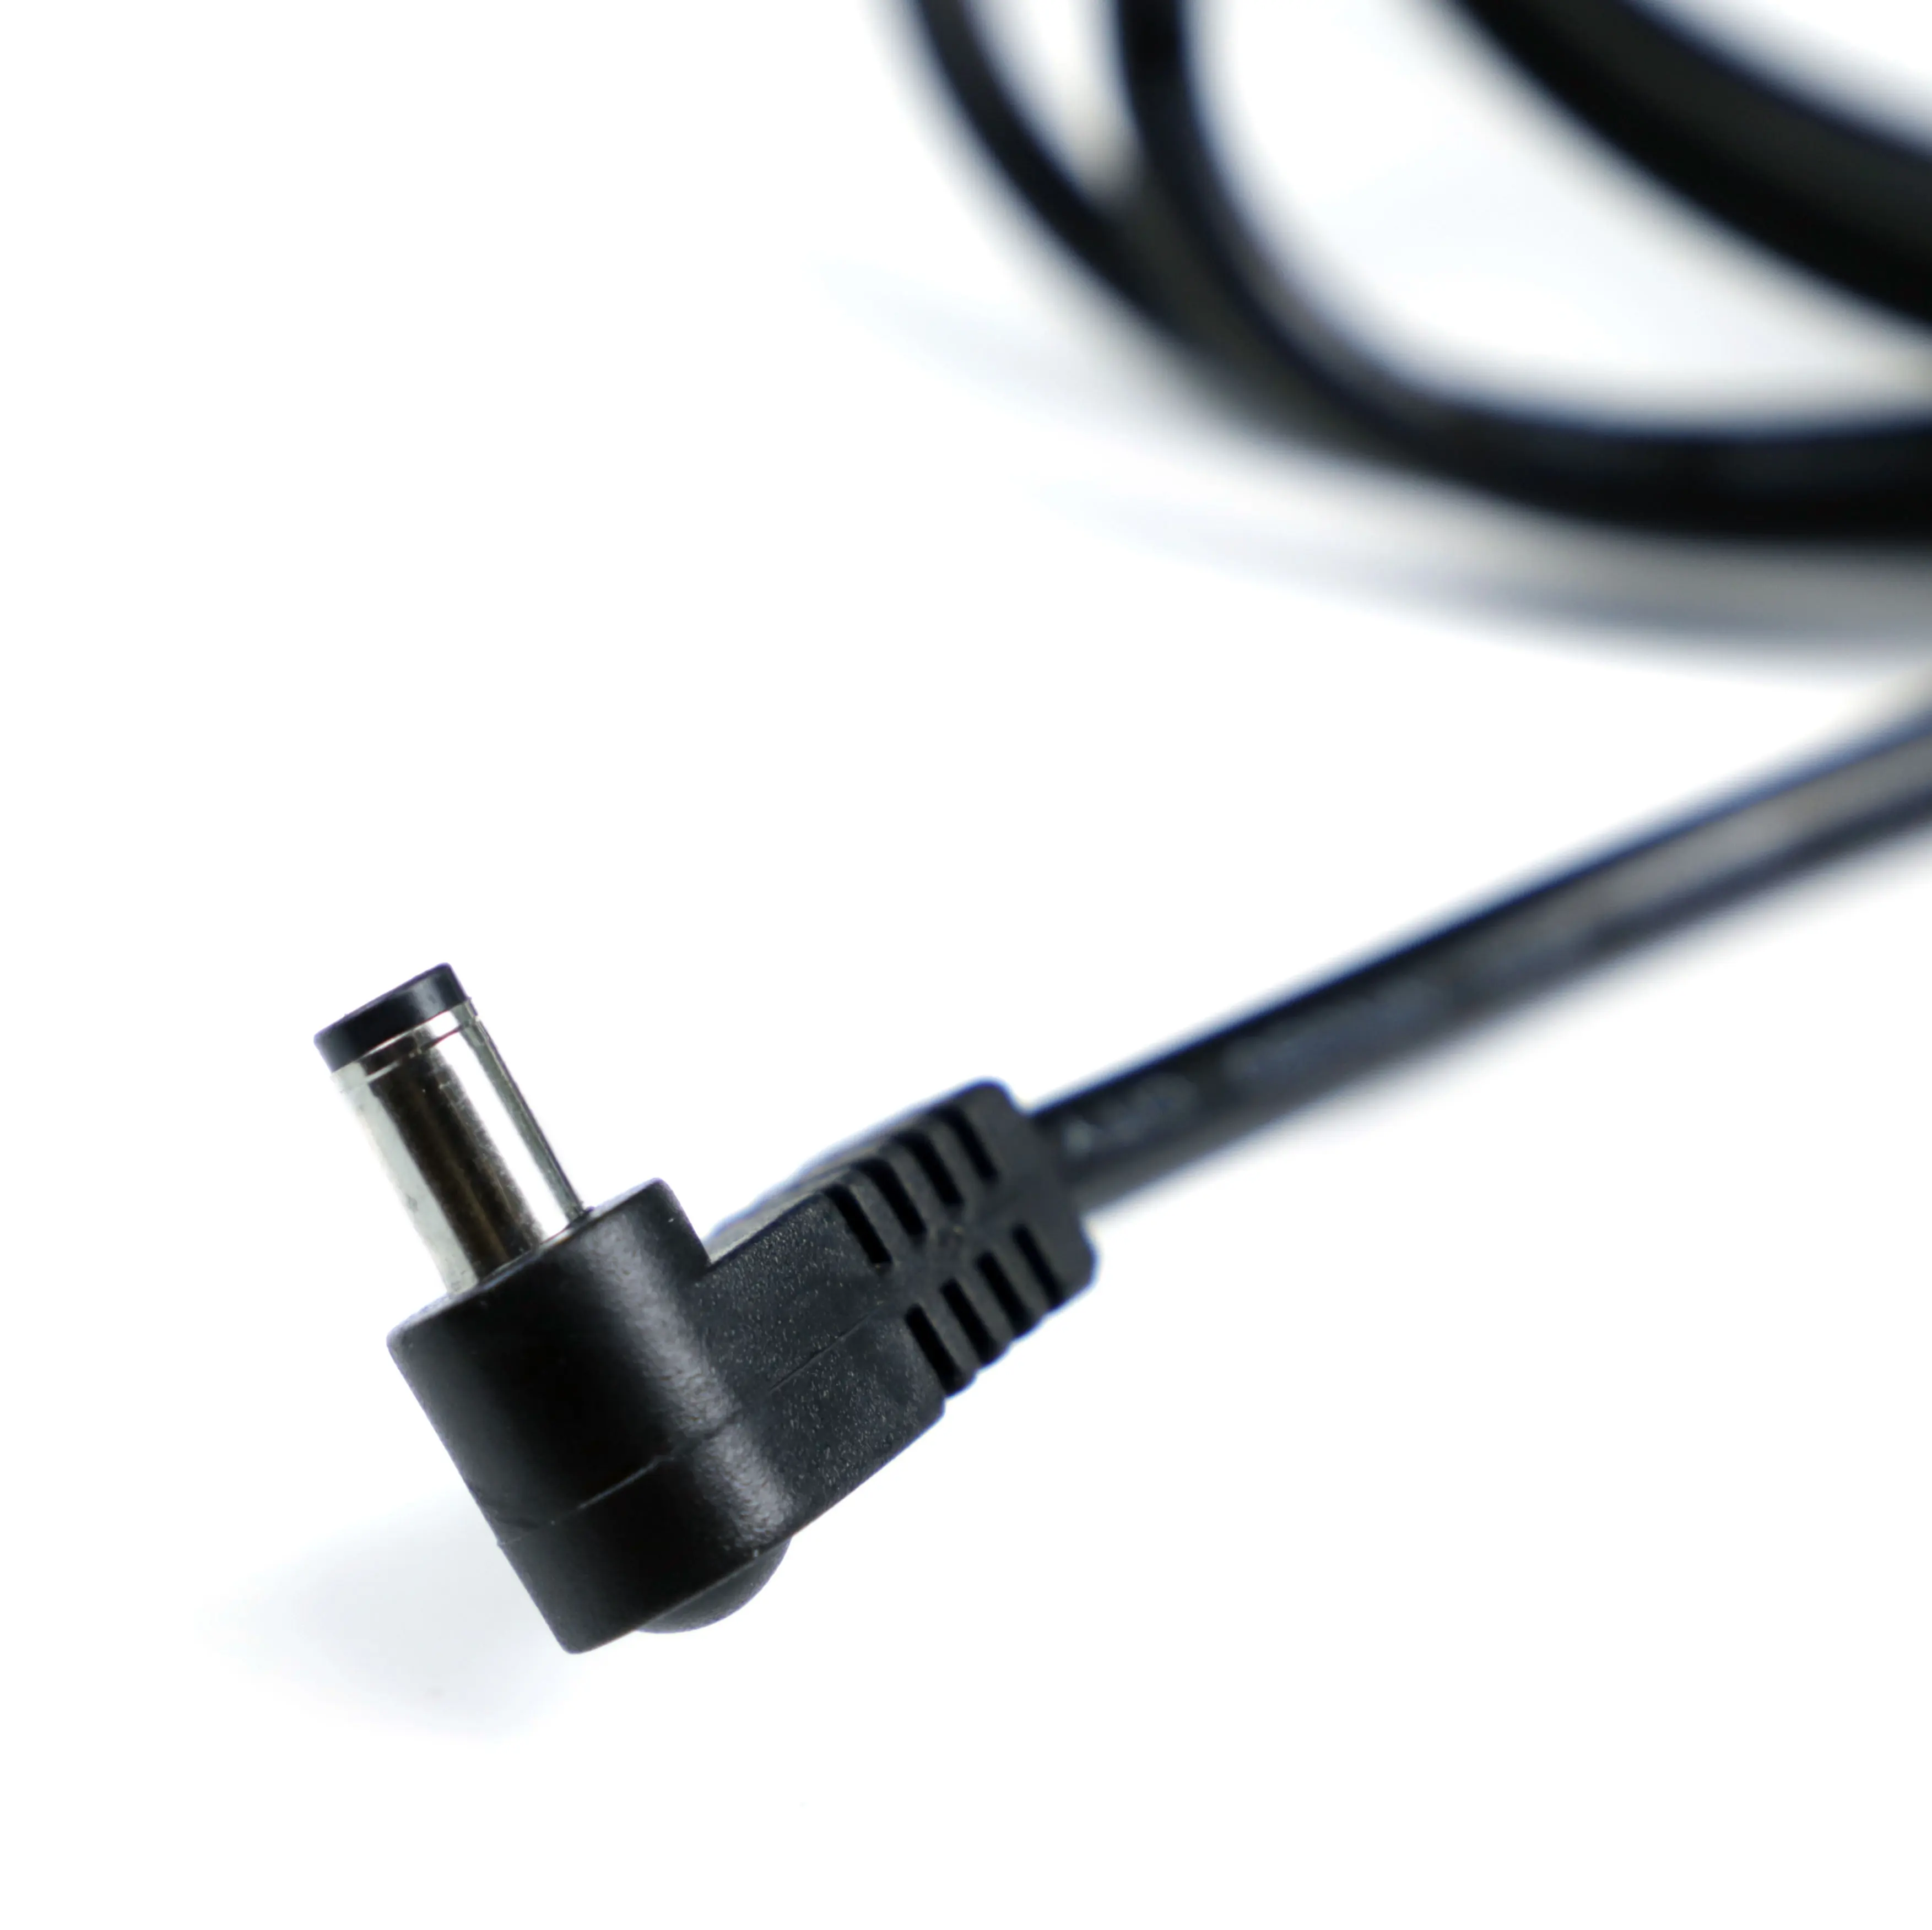 1m 5m 10m 12V Male To Male Female DC 5.5x2.1mm 5.5x2.5mm 4.0x1.7mm 3.5x1.35mm Barrel Jack Power Extension Cable